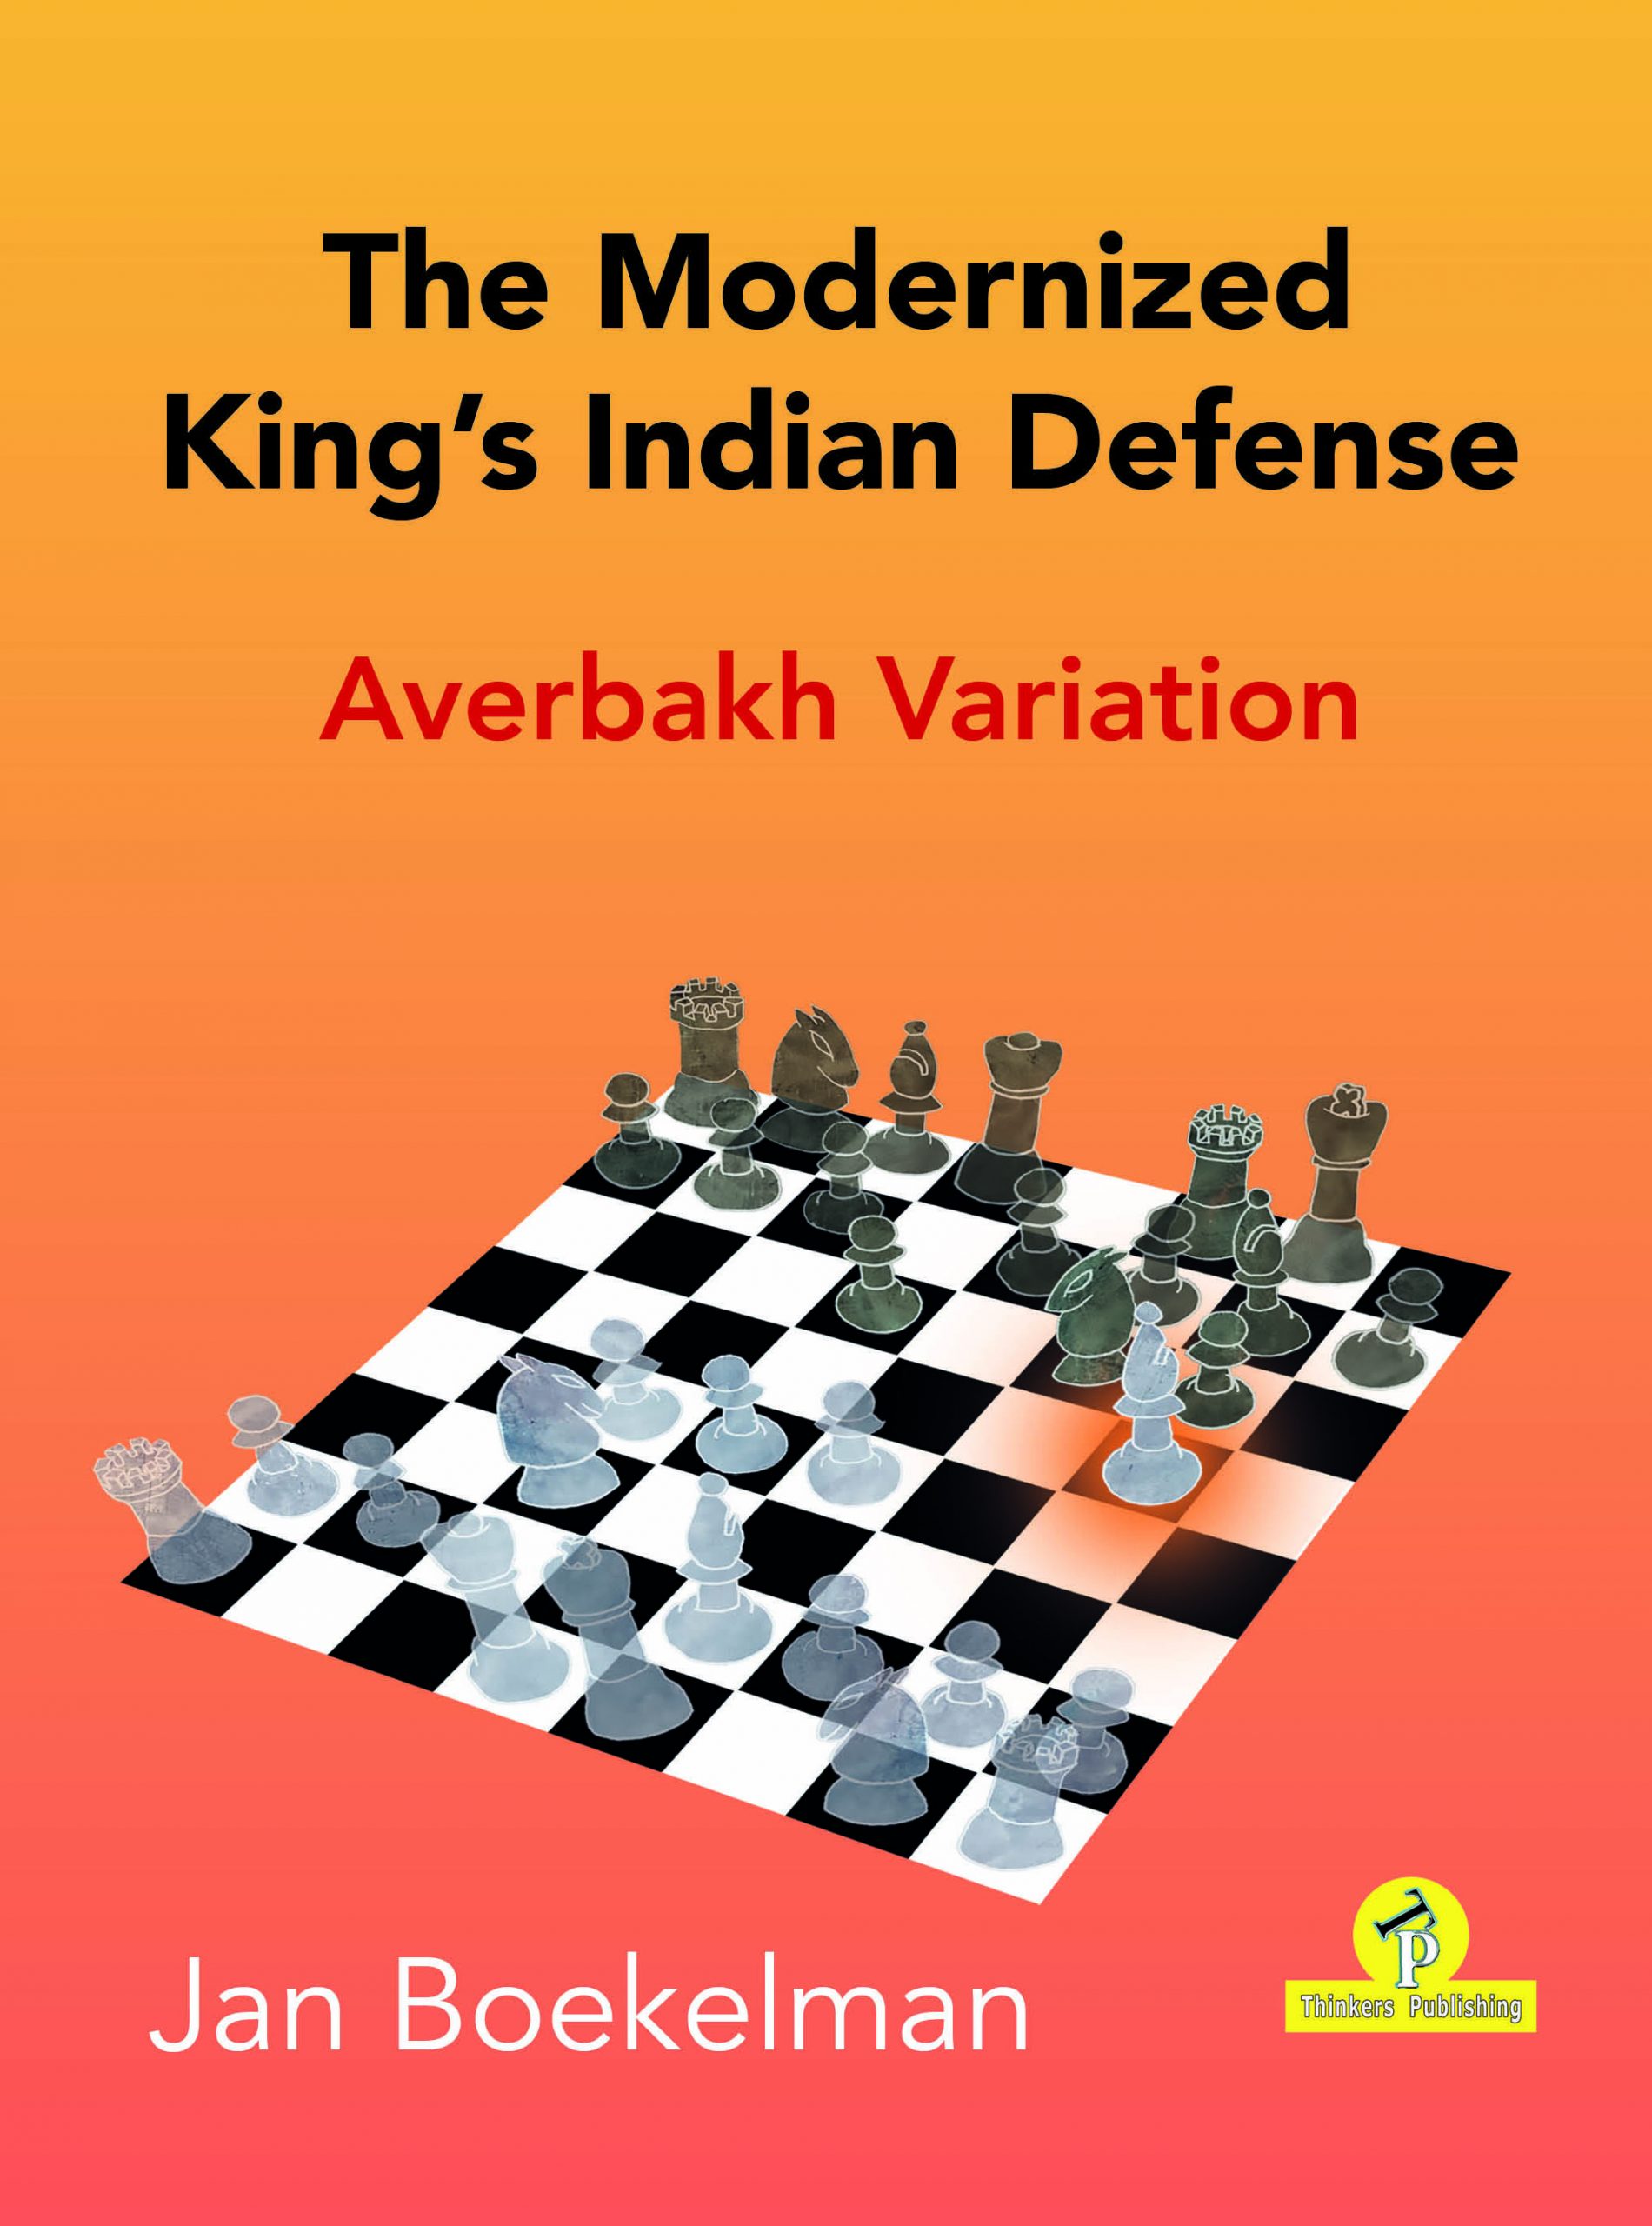 52 Chess Openings Variations by Les Entreprises SynHeme Inc.